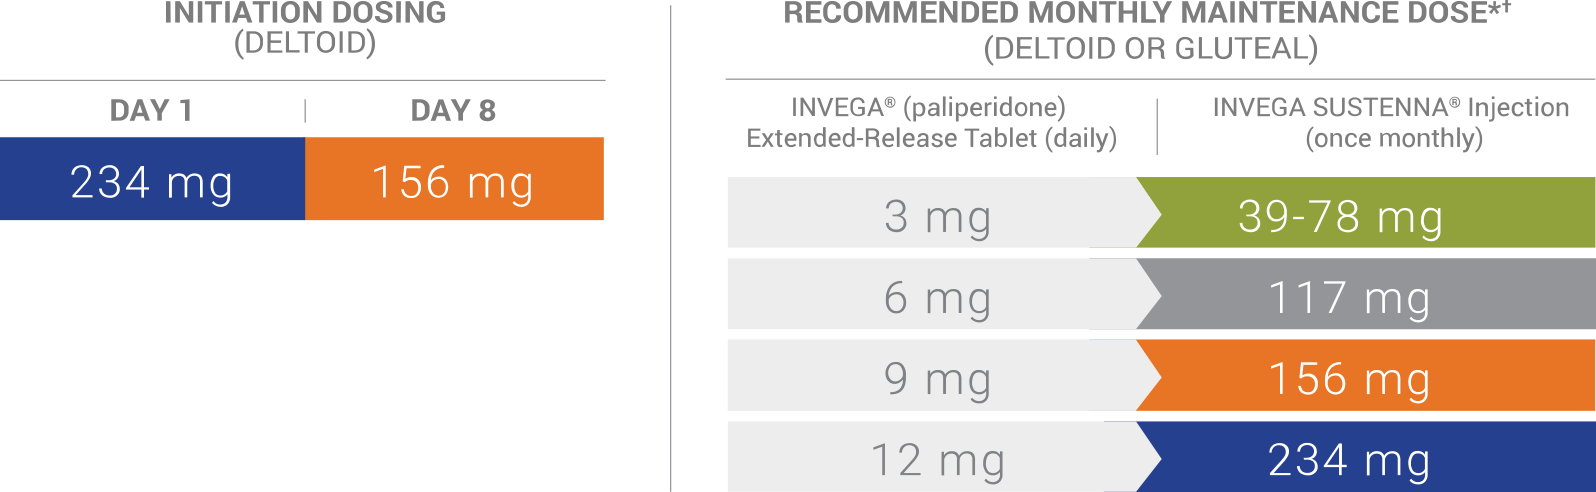 A chart showing the recommended dosage when transitioning from INVEGA SUSTENNA®